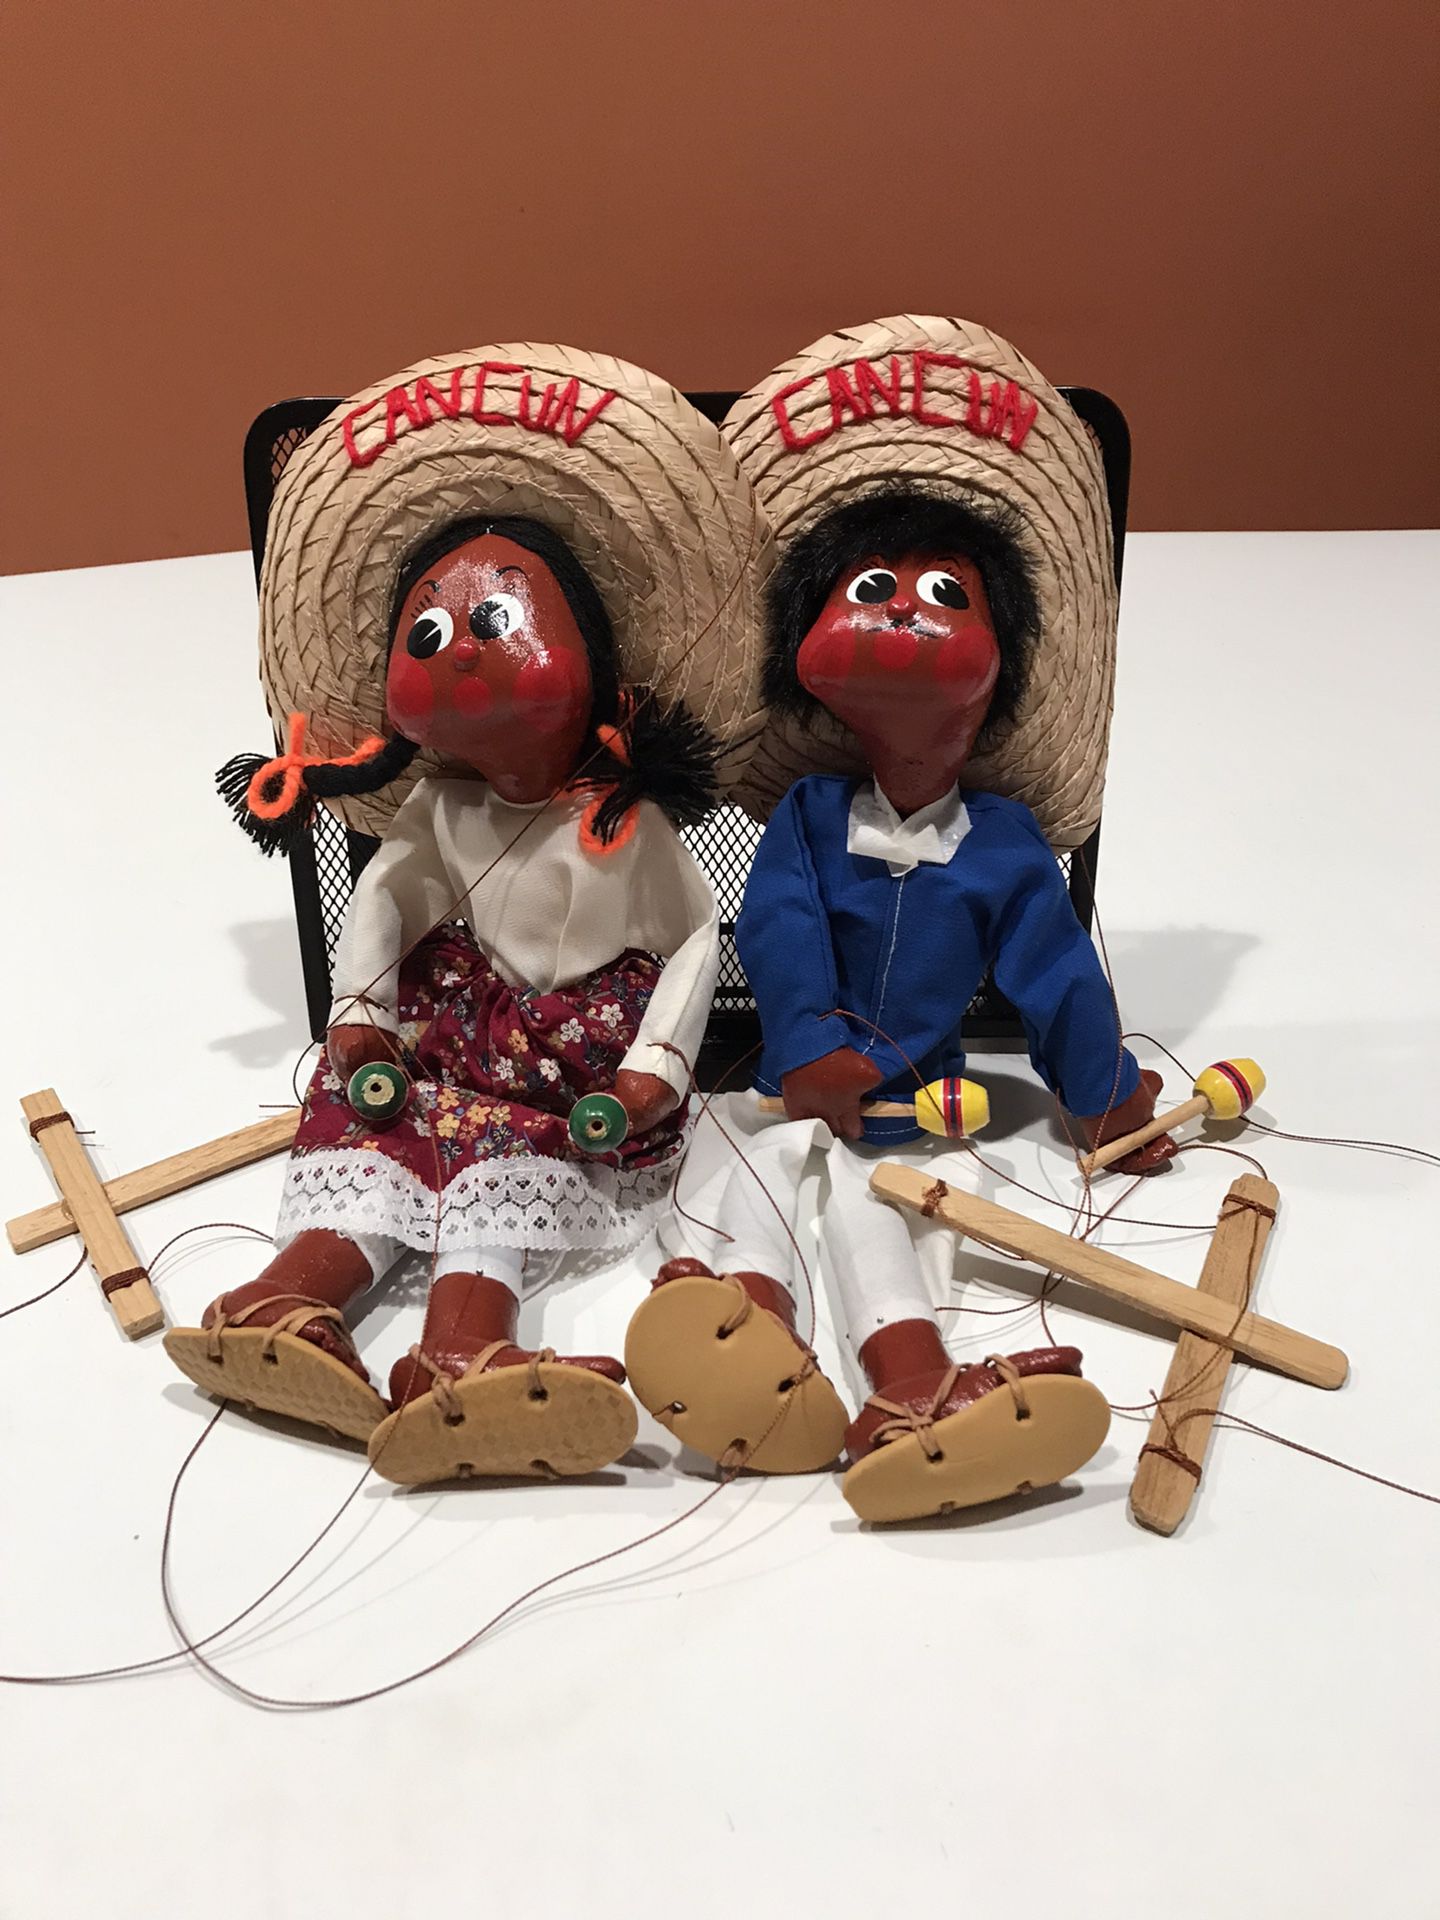 NWOT Lovely Couple of Mexican Dancing String Controlled Marionettes, 14” tall